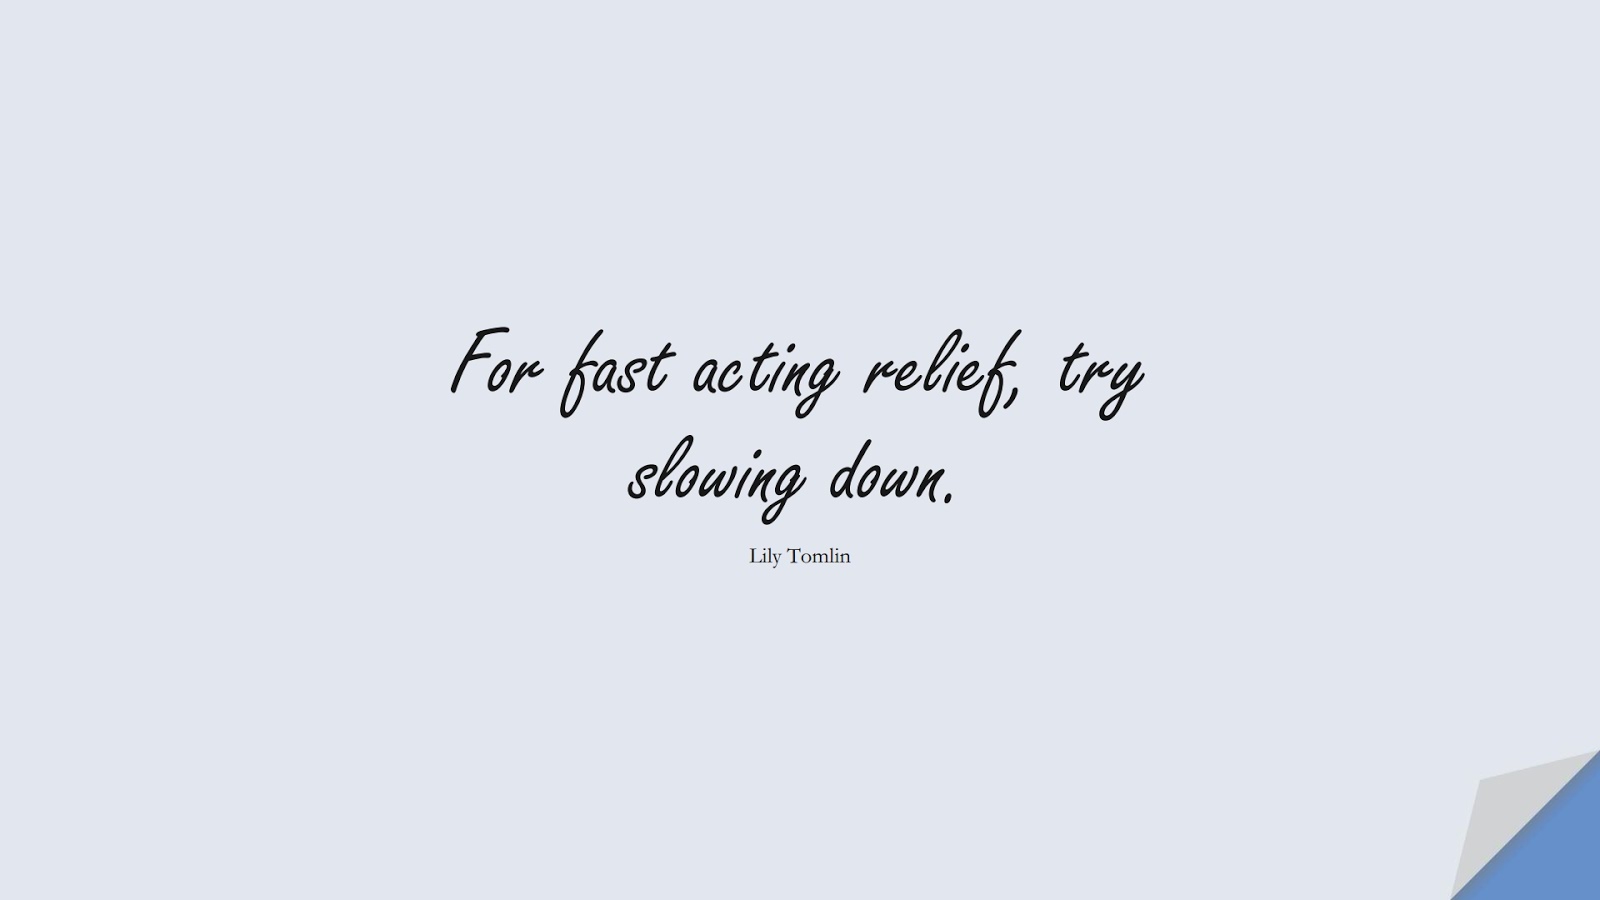 For fast acting relief, try slowing down. (Lily Tomlin);  #AnxietyQuotes